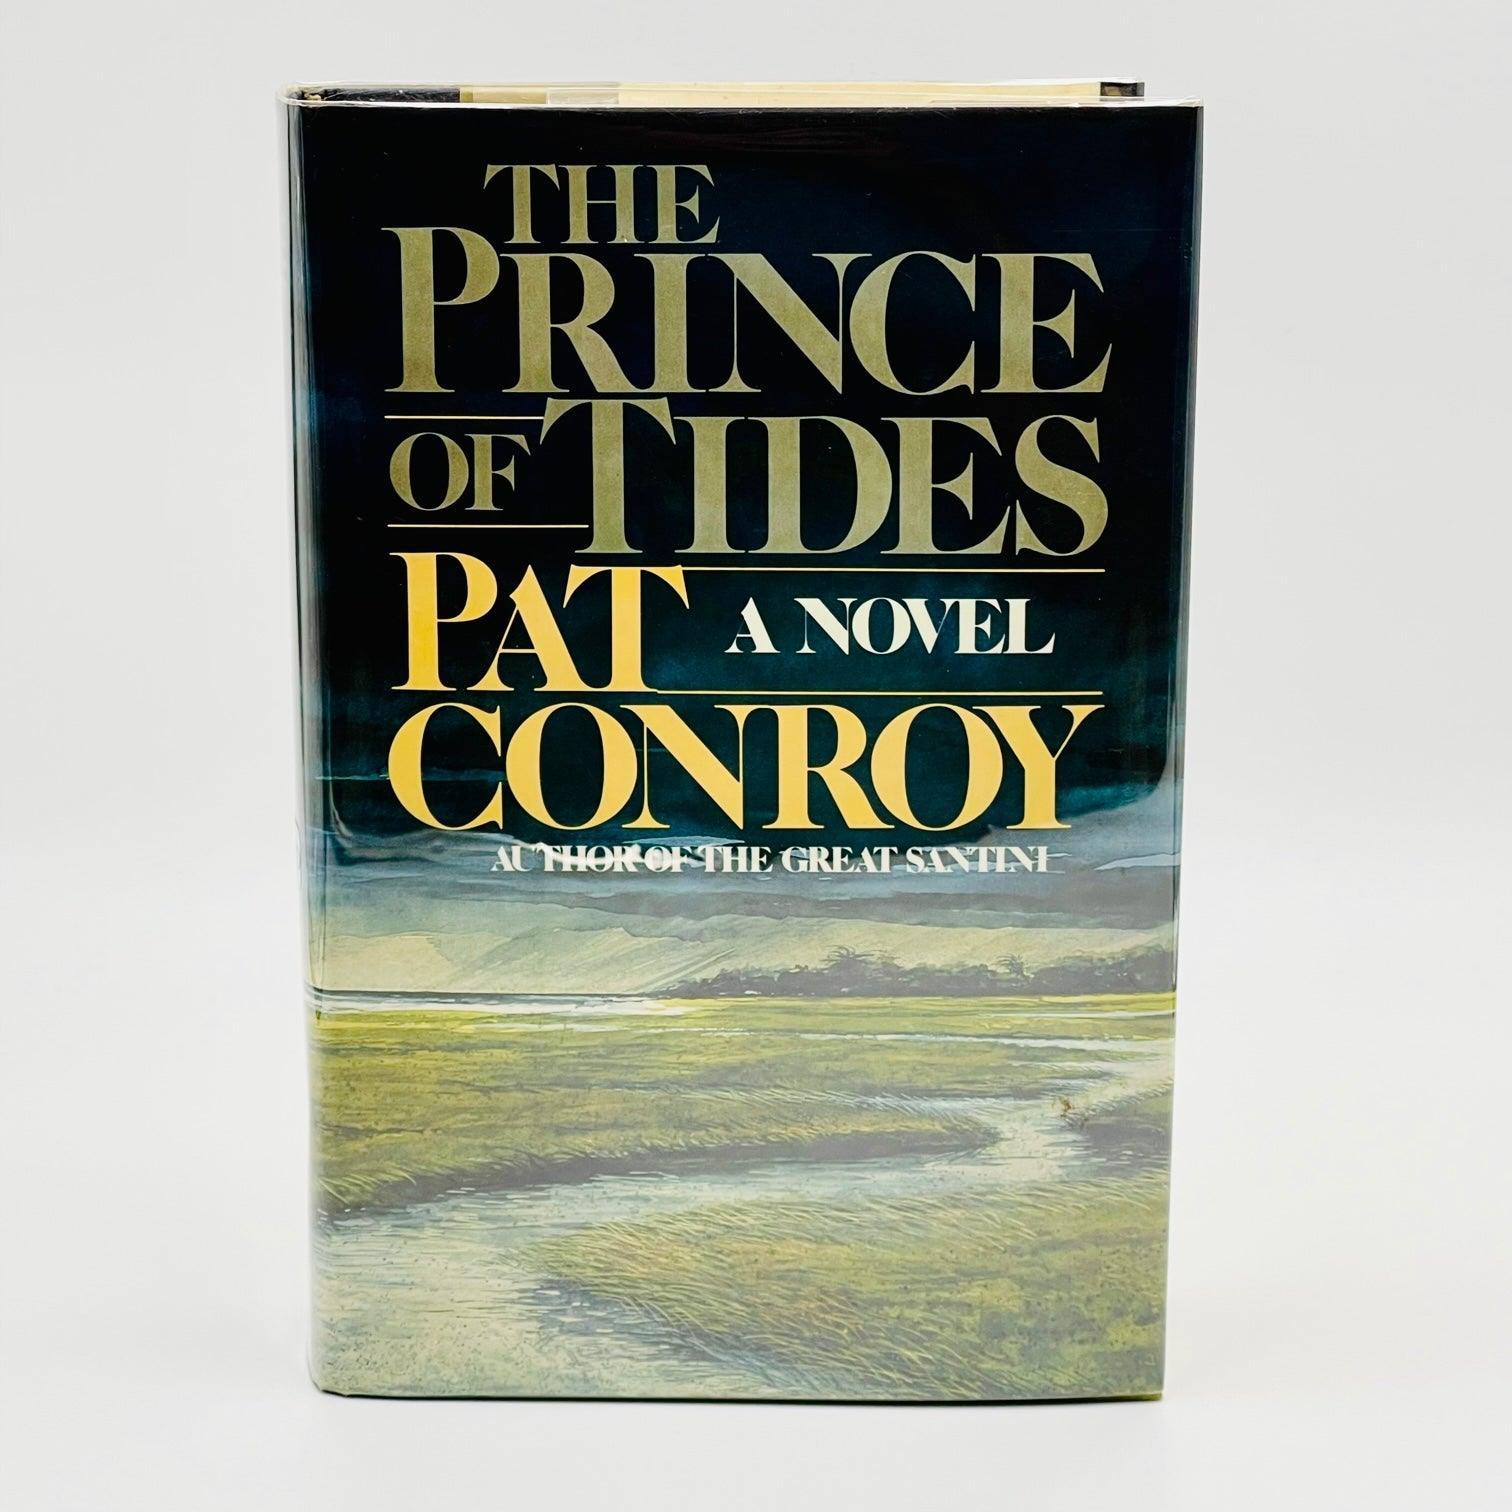 Prince of Tides (signed) - Grinning Cat Books - LITERATURE - AMERICAN LITERATURE, MODERN FIRST, SIGNED